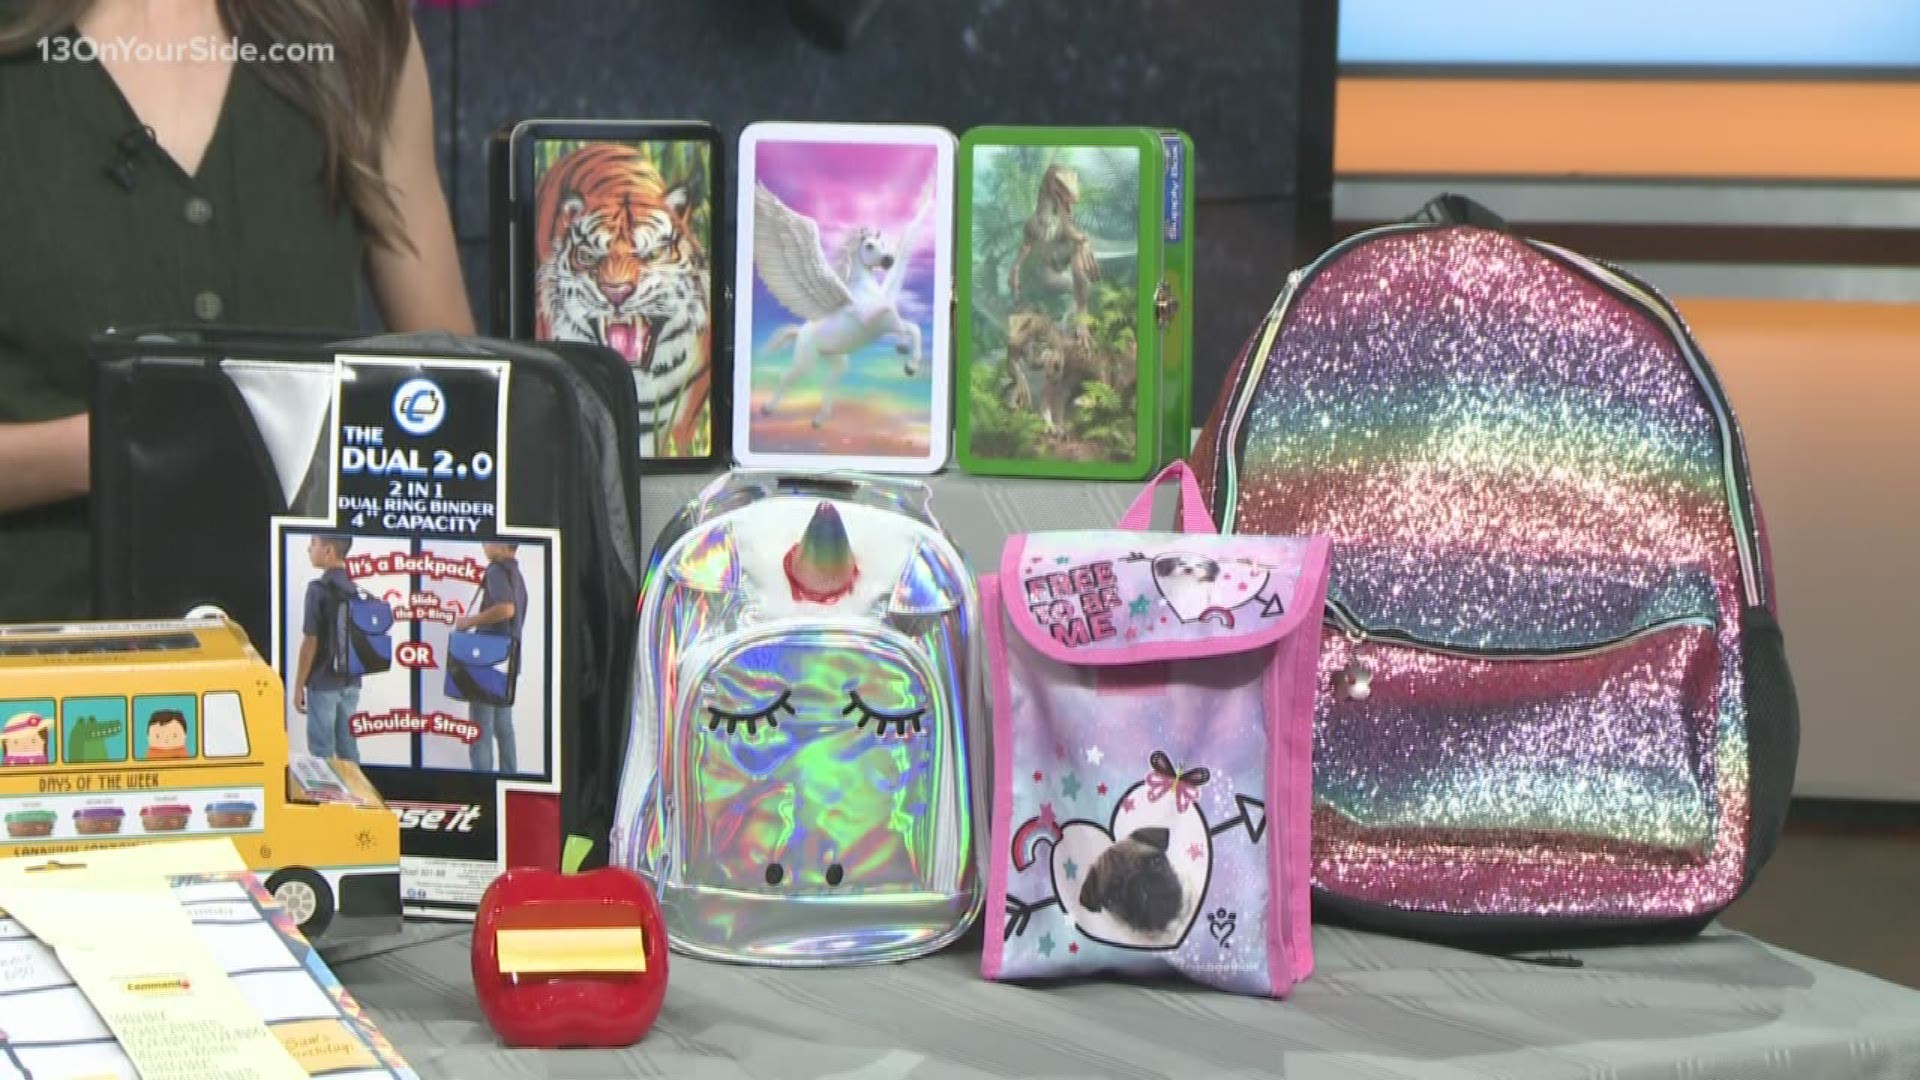 13 ON YOUR SIDE was joined by Meijer to show off what school supplies are trending this year.